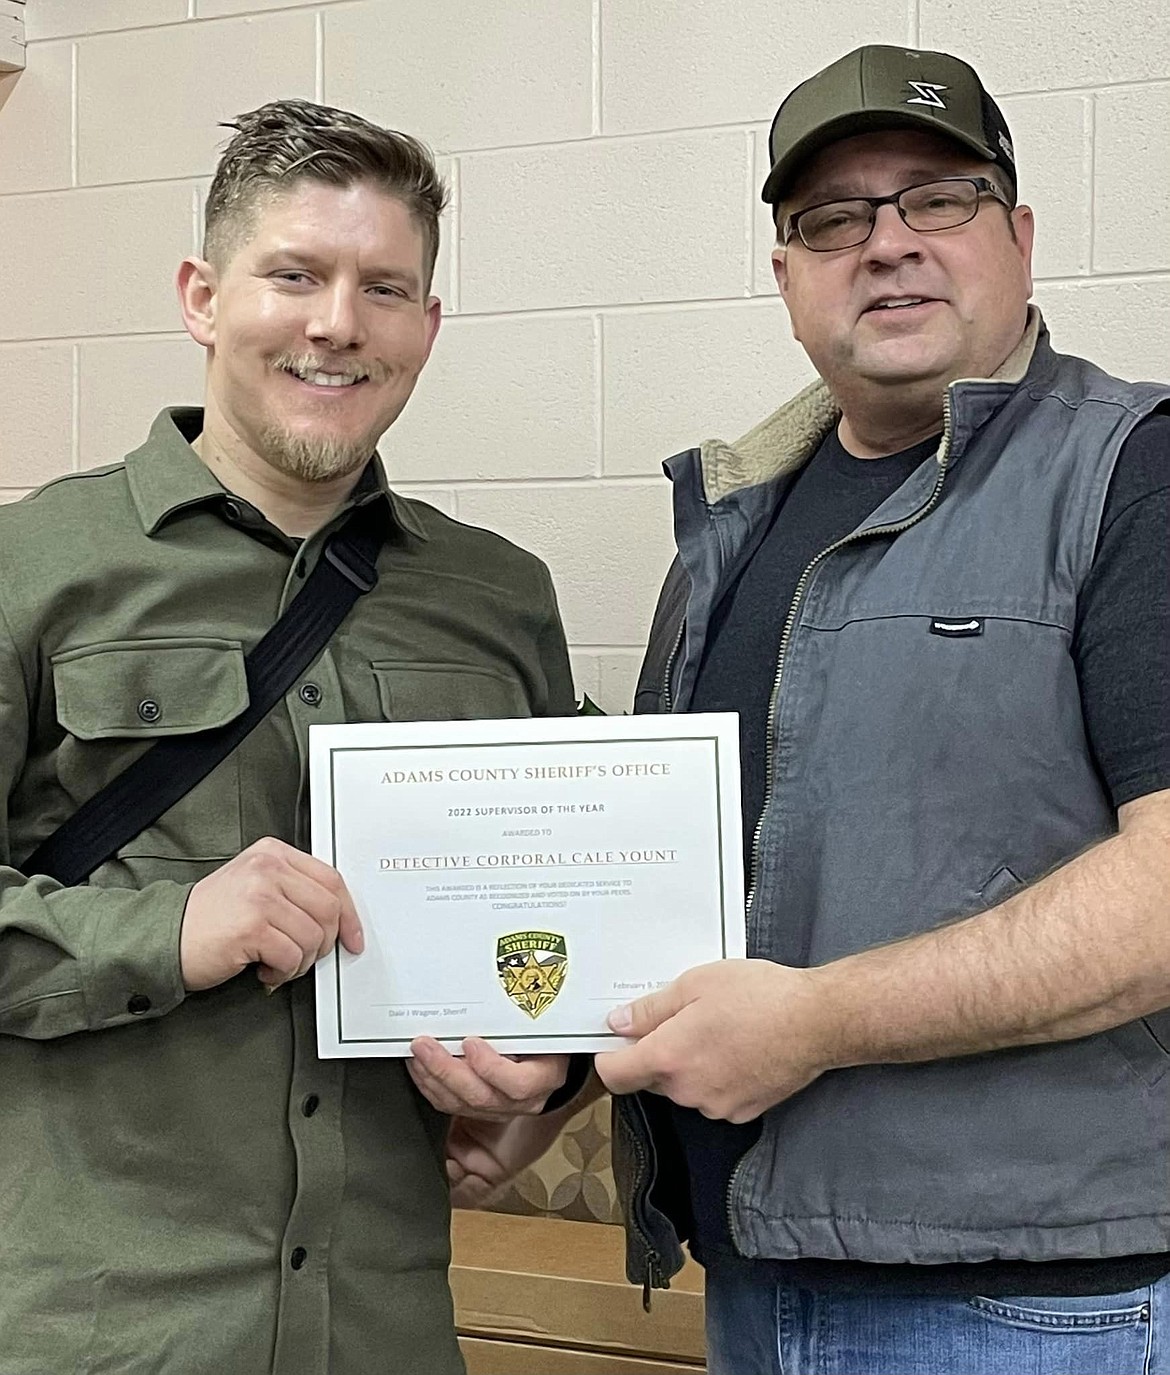 Detective Corporal Cale Yount, left, was named as supervisor of the year at the Adams County Sheriff’s Office awards dinner. The award was presented by Sheriff Dale Wagner.